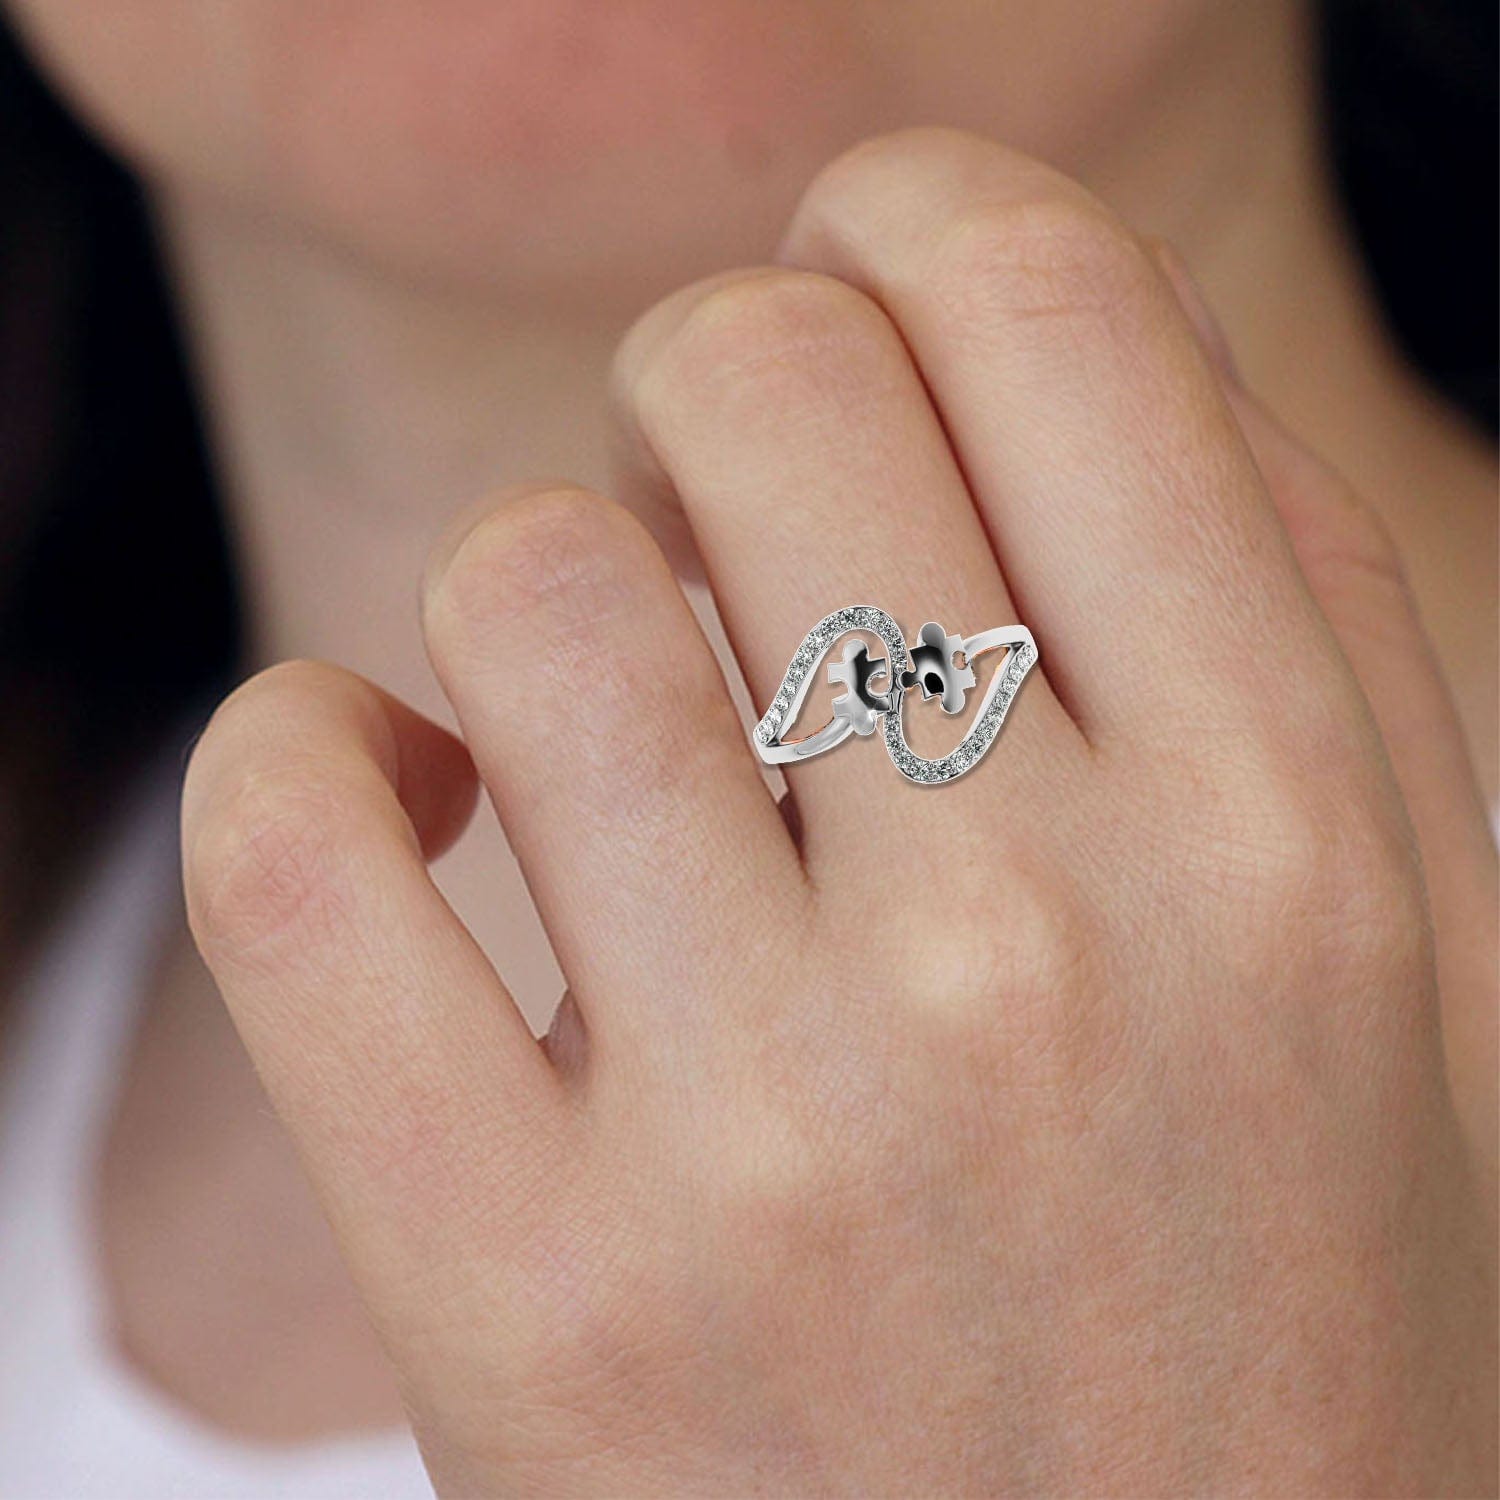 Why an Engagement Ring is Worn on the Fourth Finger | Zillion